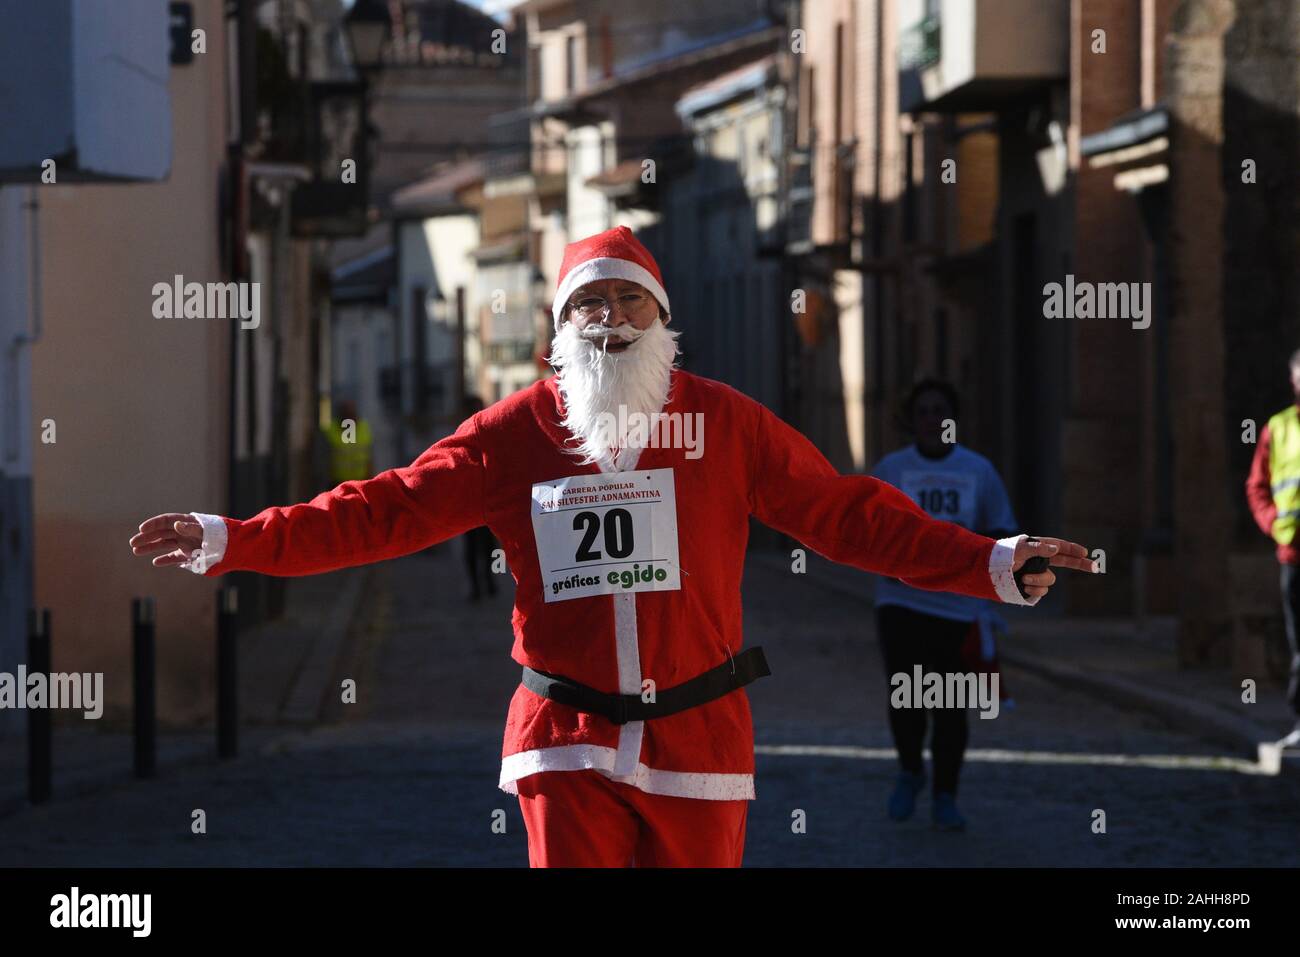 A man dressed as Santa Claus takes part during the race.During the last days of the year, hundreds of Spanish towns and cities celebrate popular races called San Silvestre. The most famous, known as San Silvestre Vallecana, will be celebrated next Tuesday, 31 December in Madrid. Stock Photo